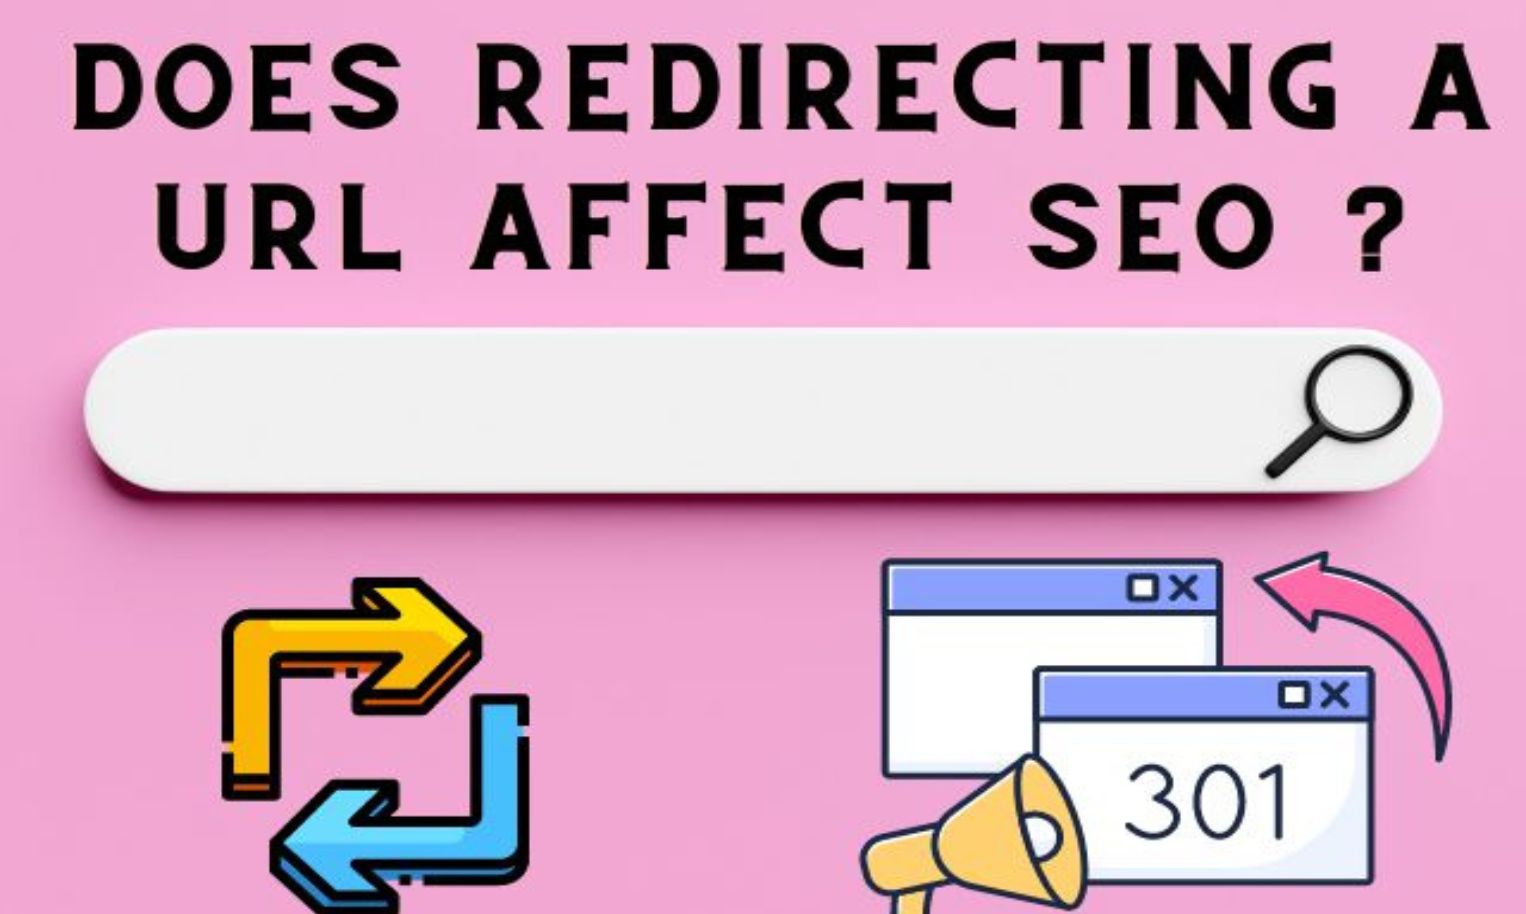 Does Redirecting A URL Affect SEO? Explained